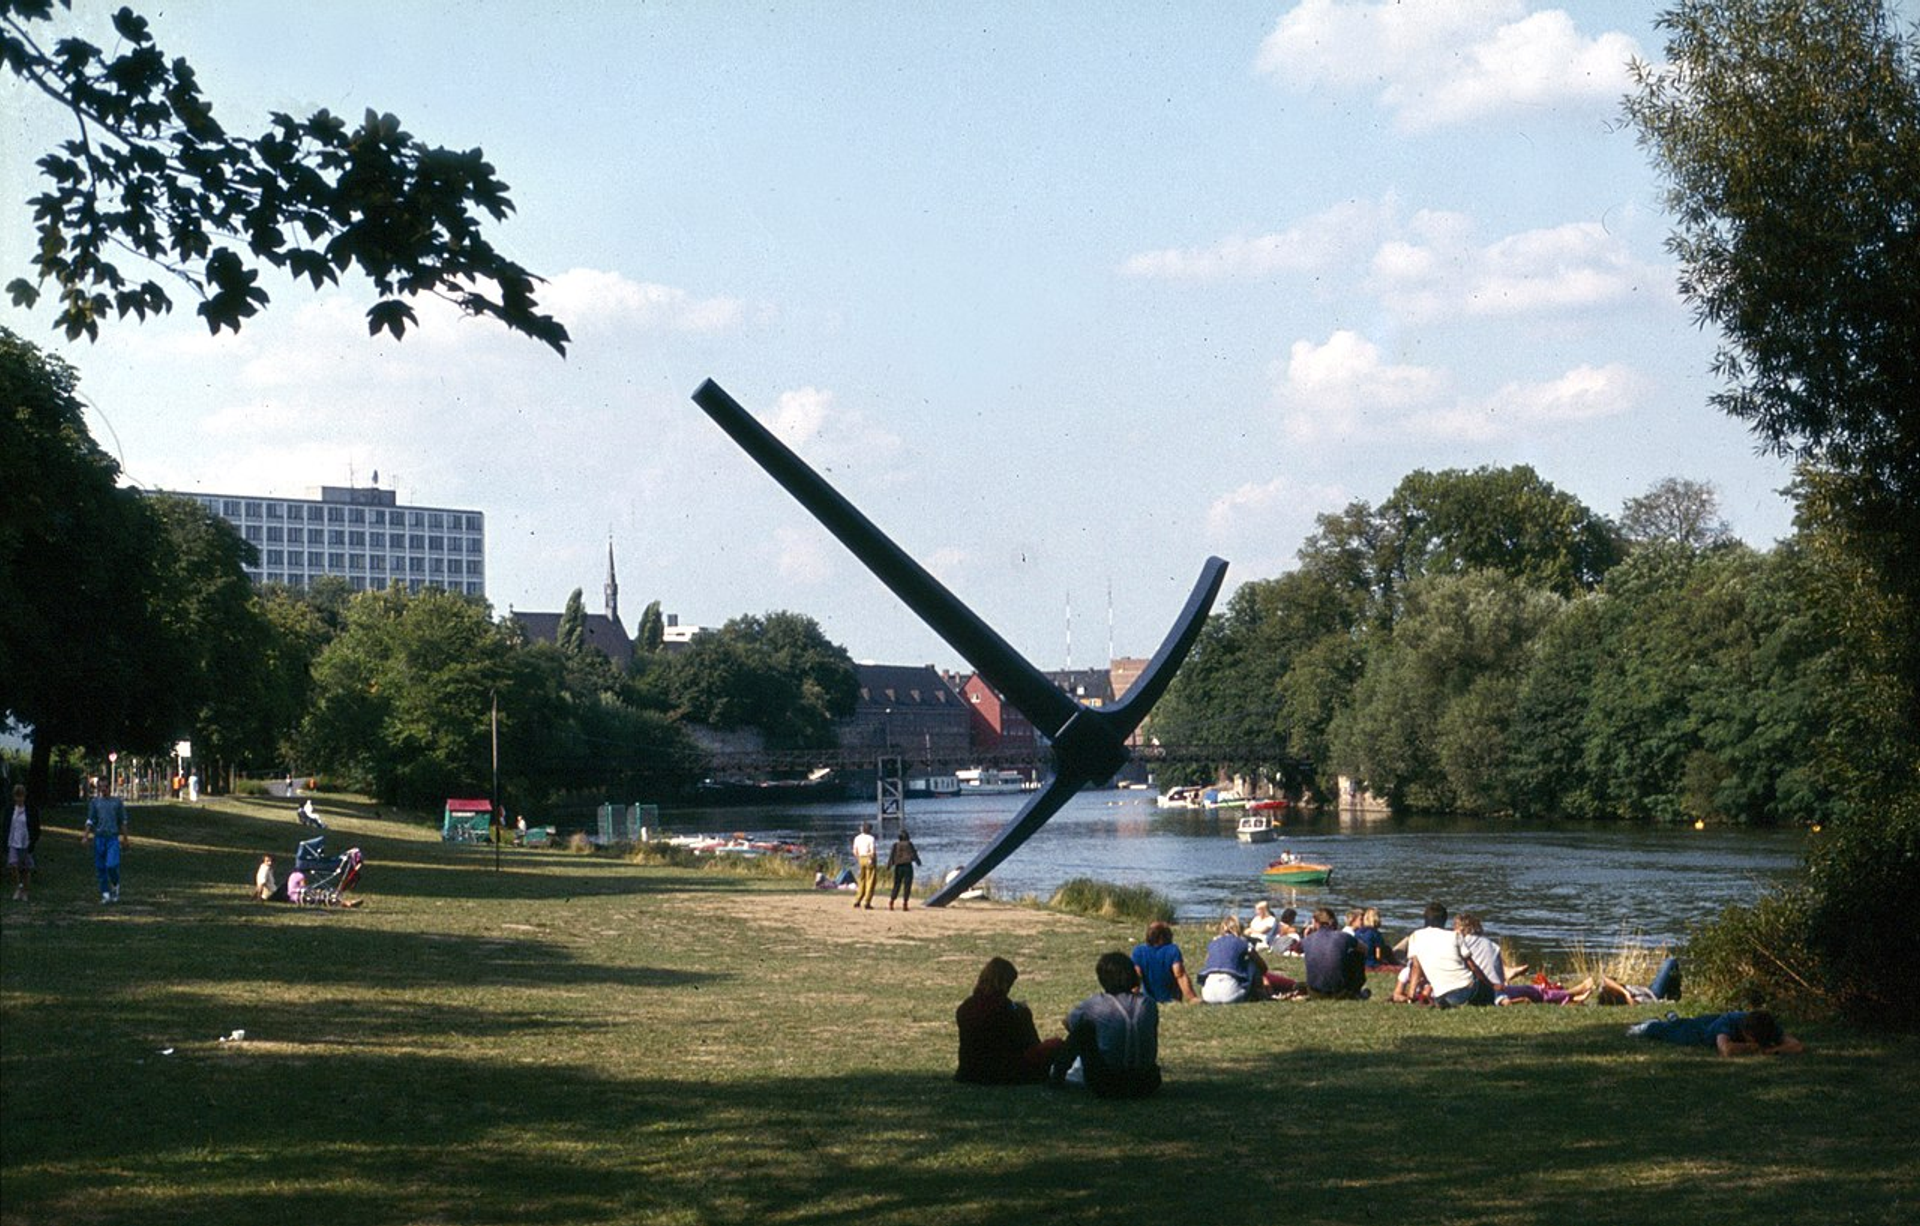 A photograph of one of the outdoor installations carried out for documenta 7. It shows people relaxing in the grass of a park by a lake, with a giant pick axe sculpture by Claes Oldenburg.